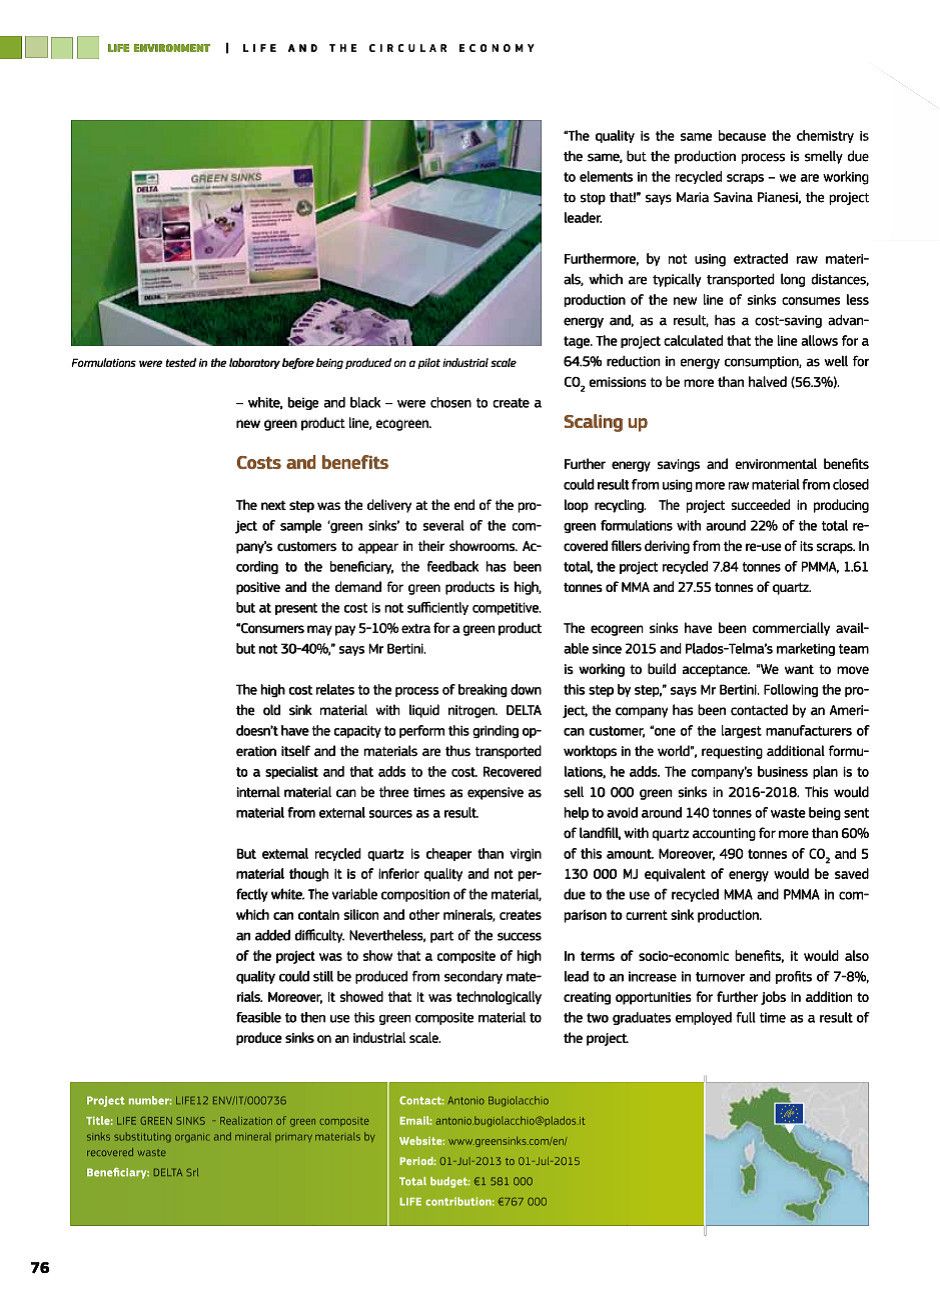 THE GREEN SINKS PROJECT IN THE EUROPEAN PUBLICATION "LIFE AND THE CIRCULAR ECONOMY" 3